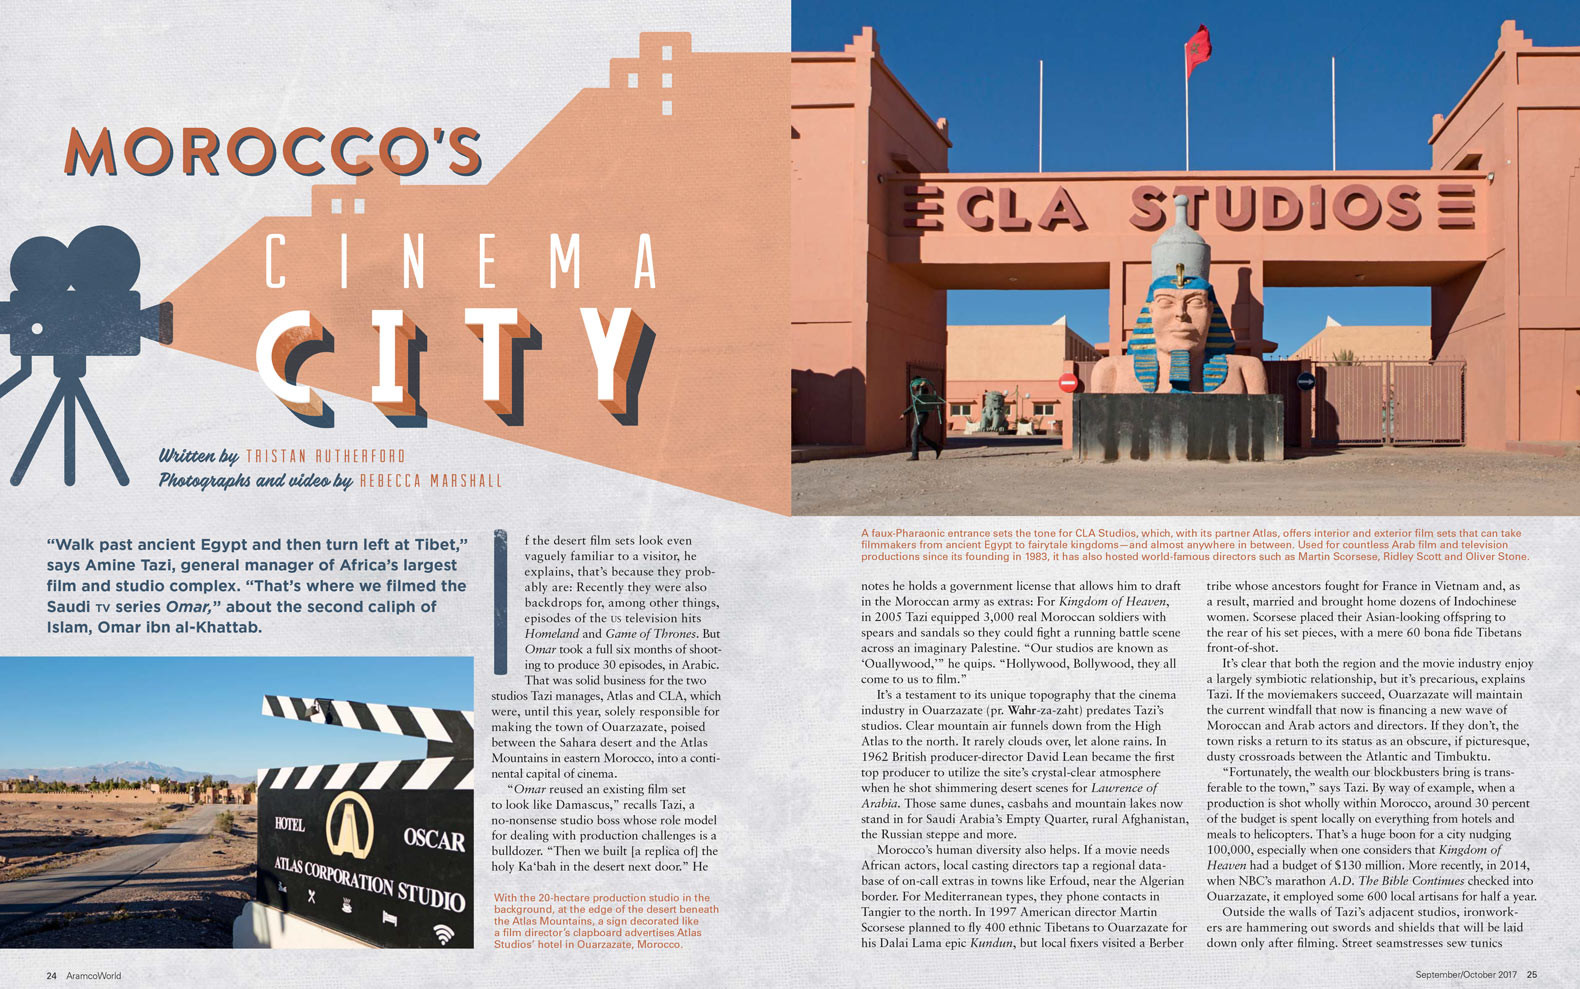 Page layout of opening spread of the feature article, showing photographs and text